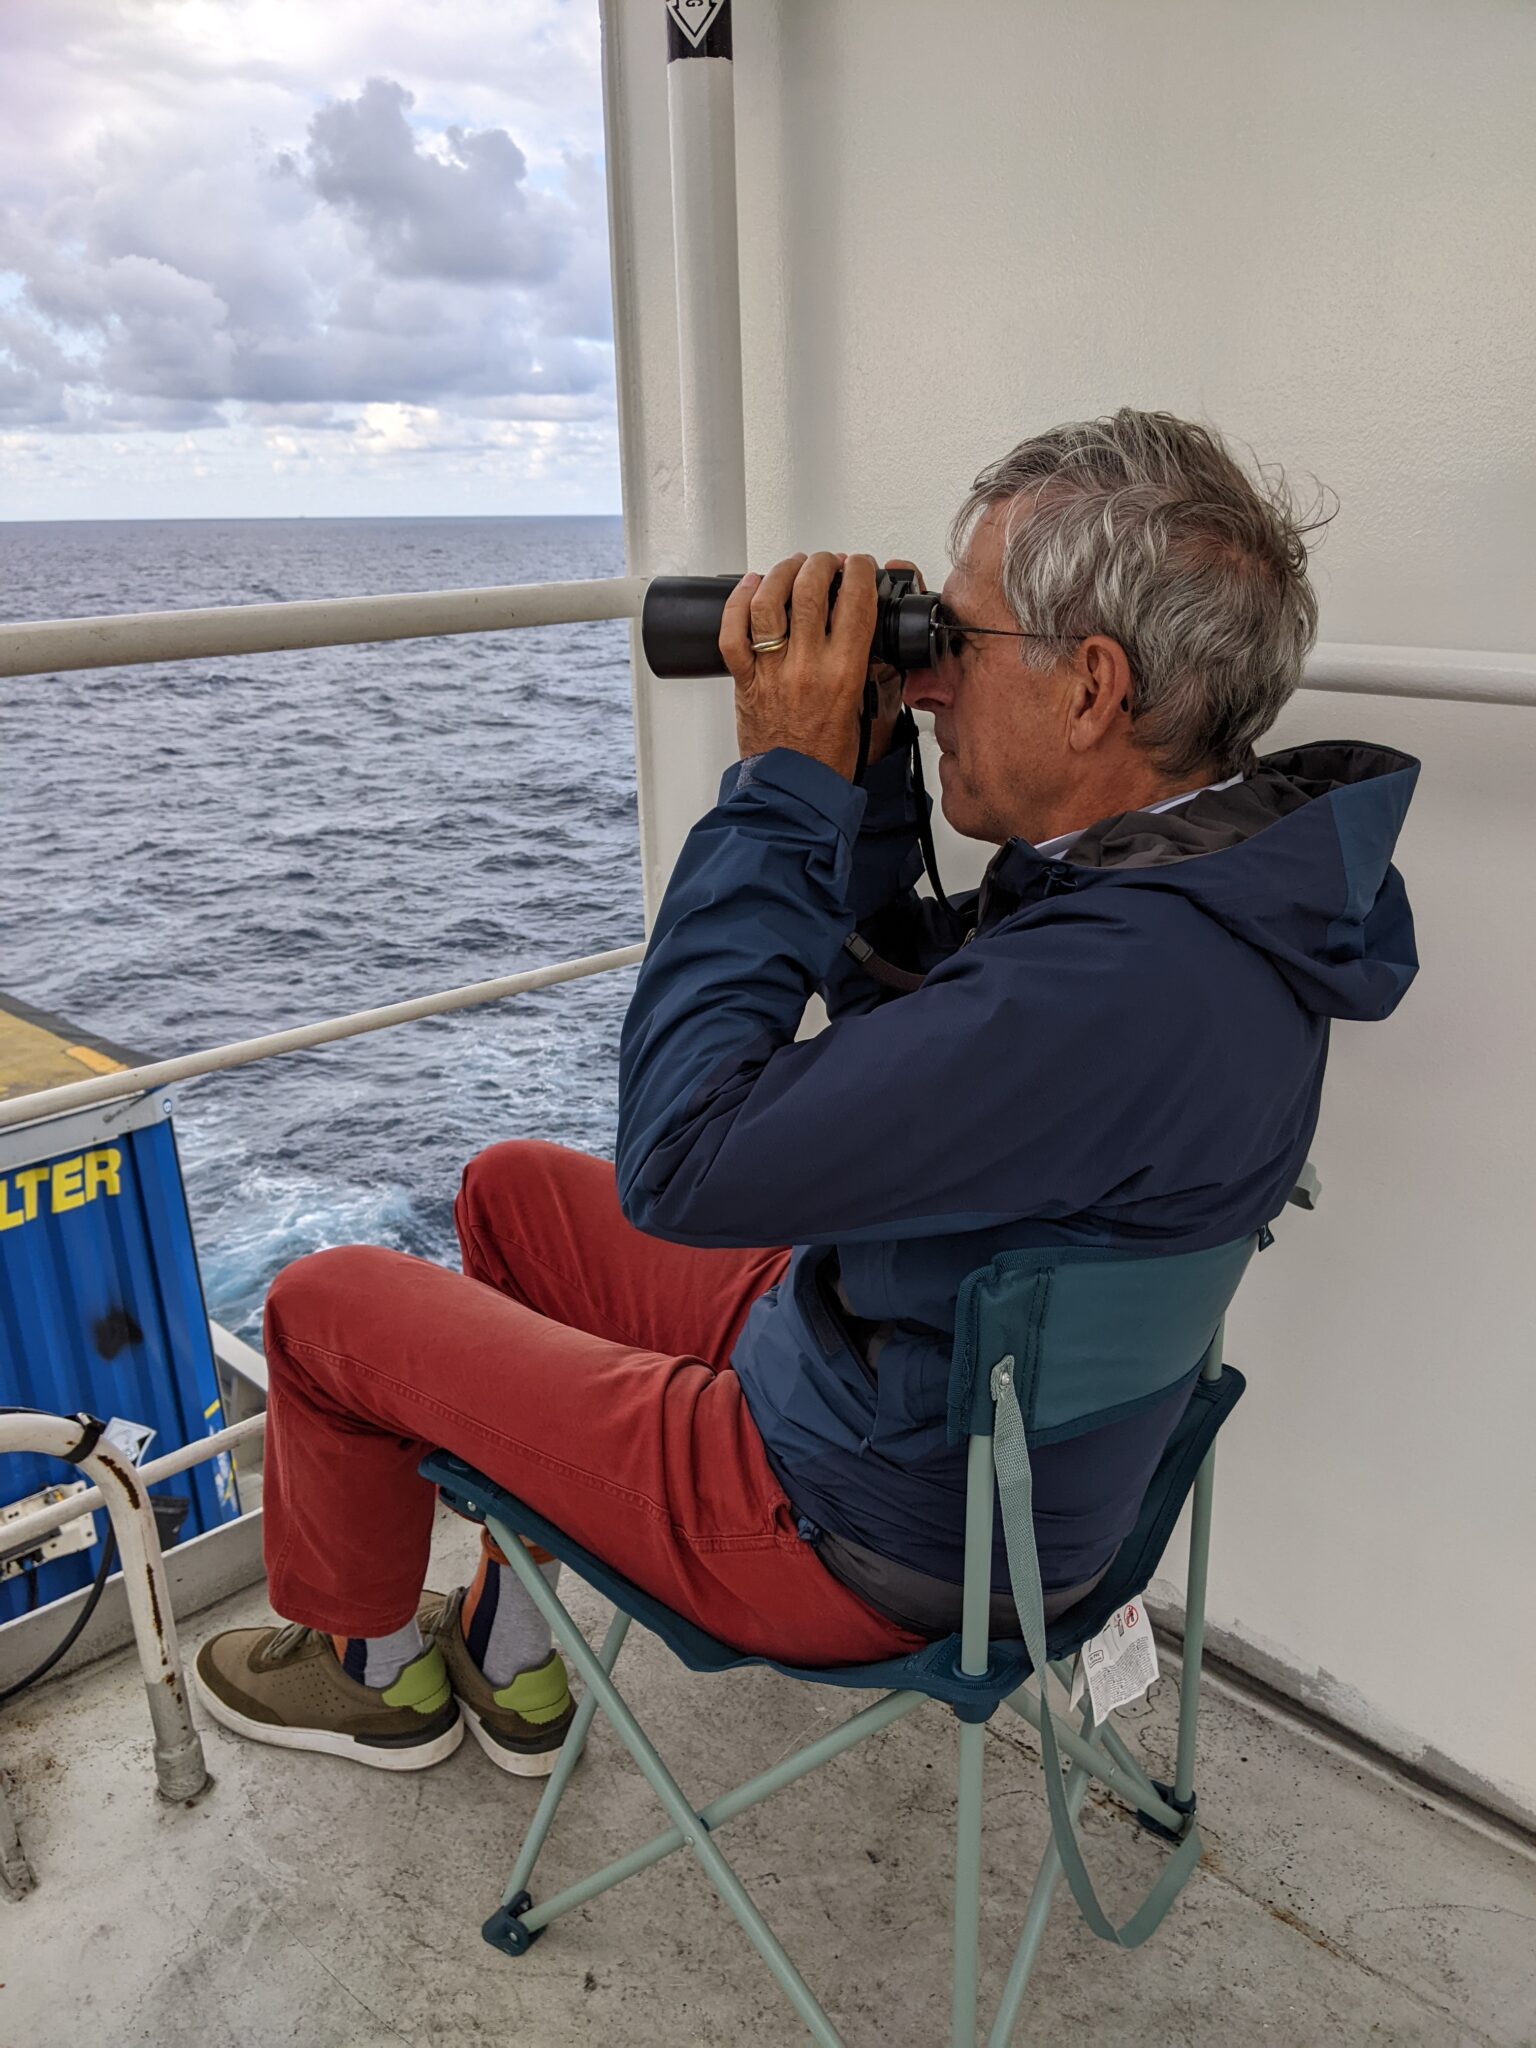 man looks through binoculars with view of sea and containers